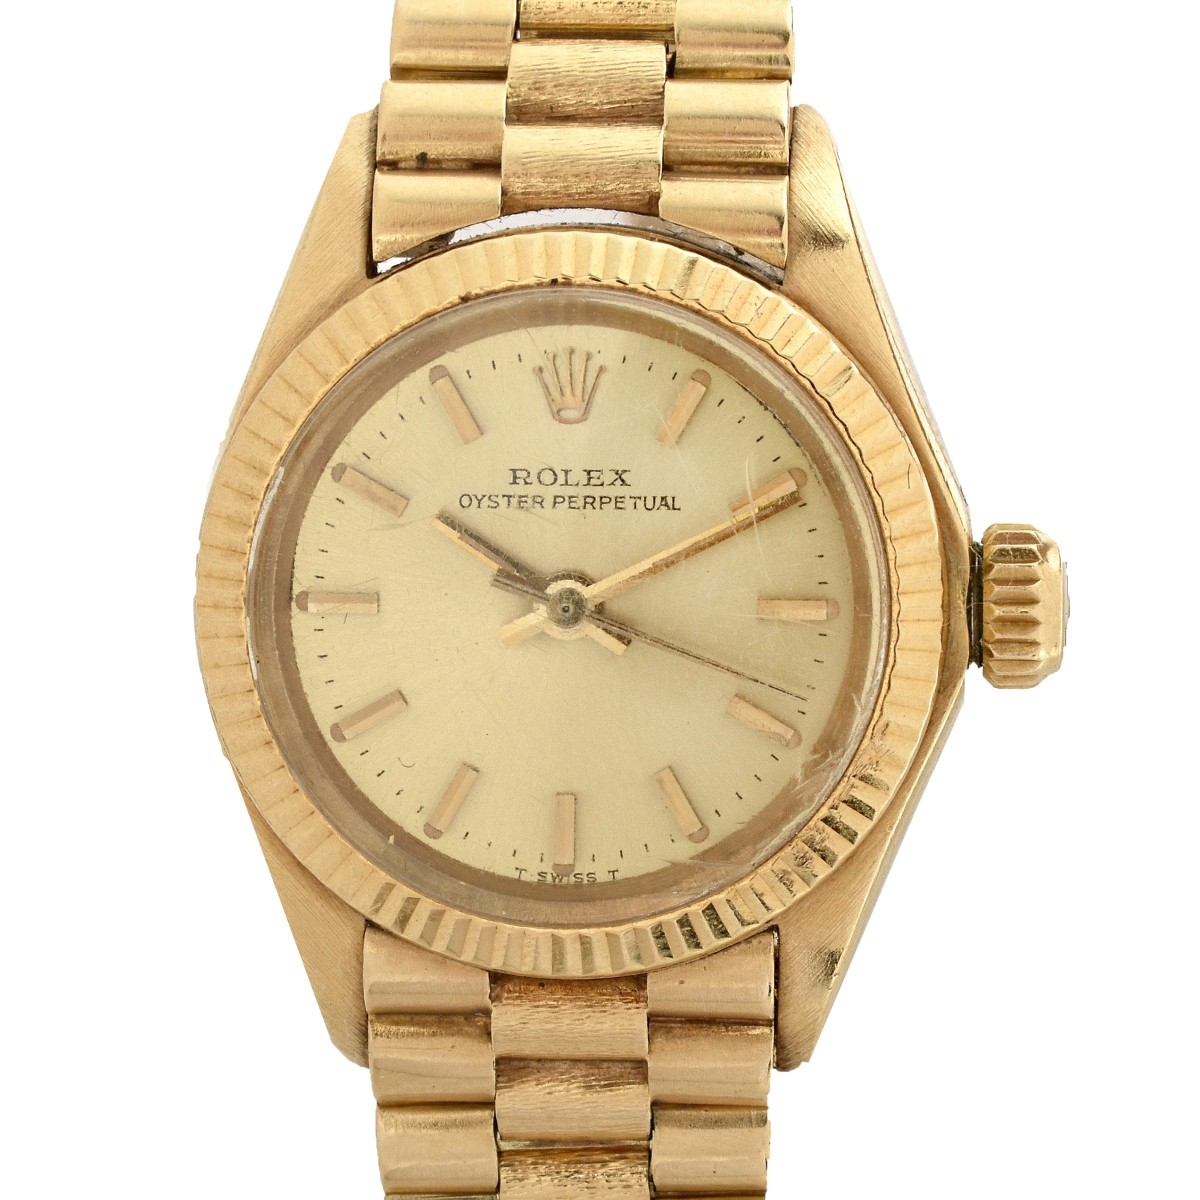 Rolex Oyster Perpetual 18K Watch